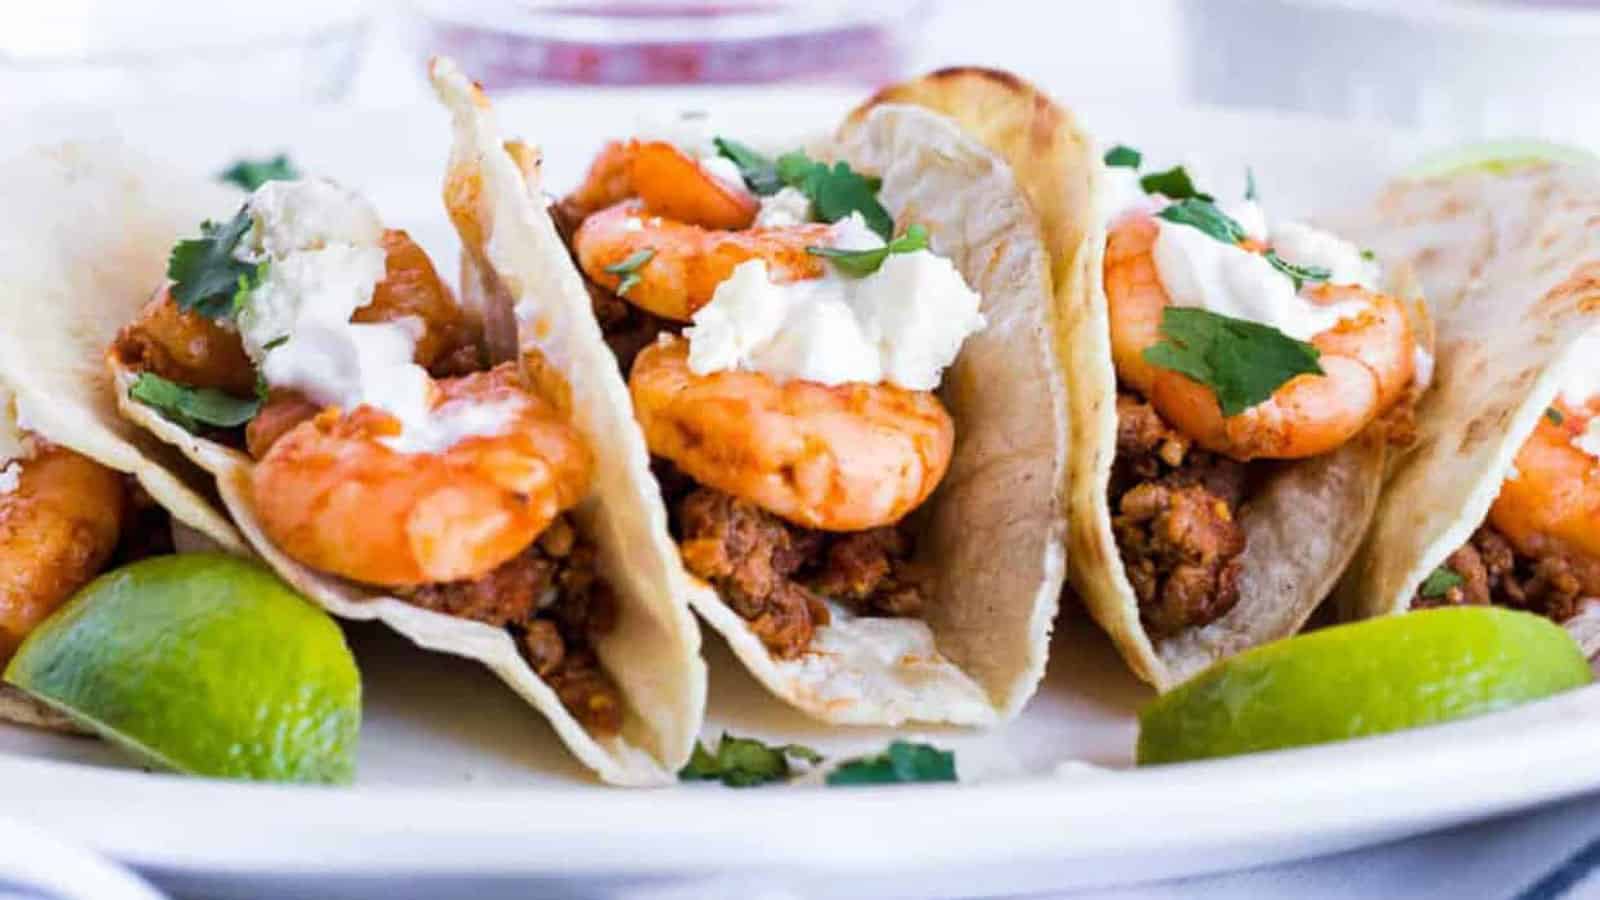 Shrimp tacos on a plate with lime wedges.